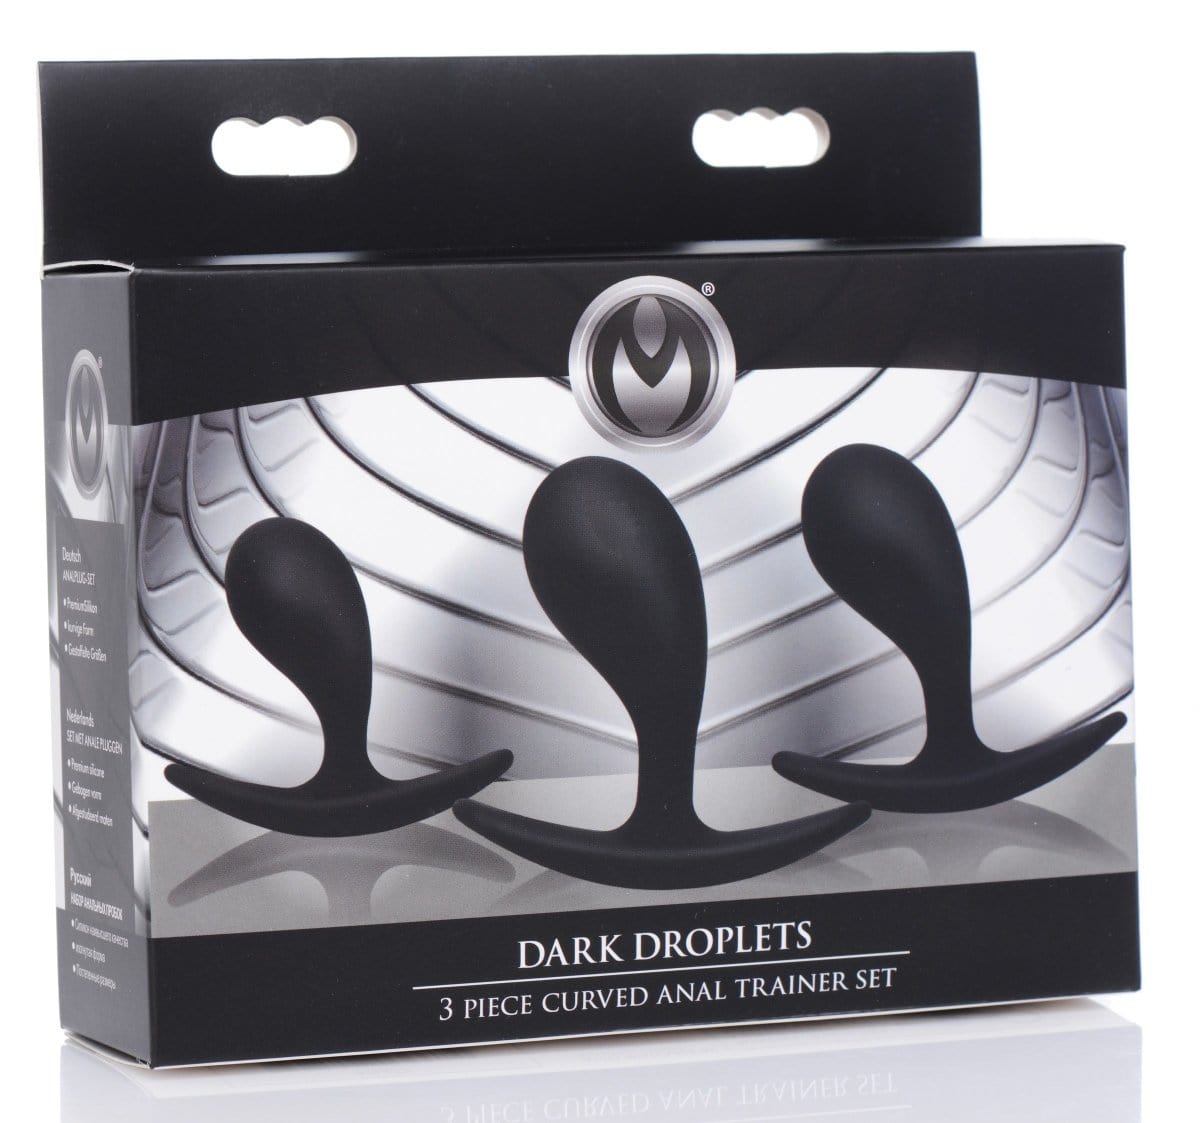 Master Series Plug Dark Droplets 3 Piece Curved Silicone Anal Trainer Set at the Haus of Shag